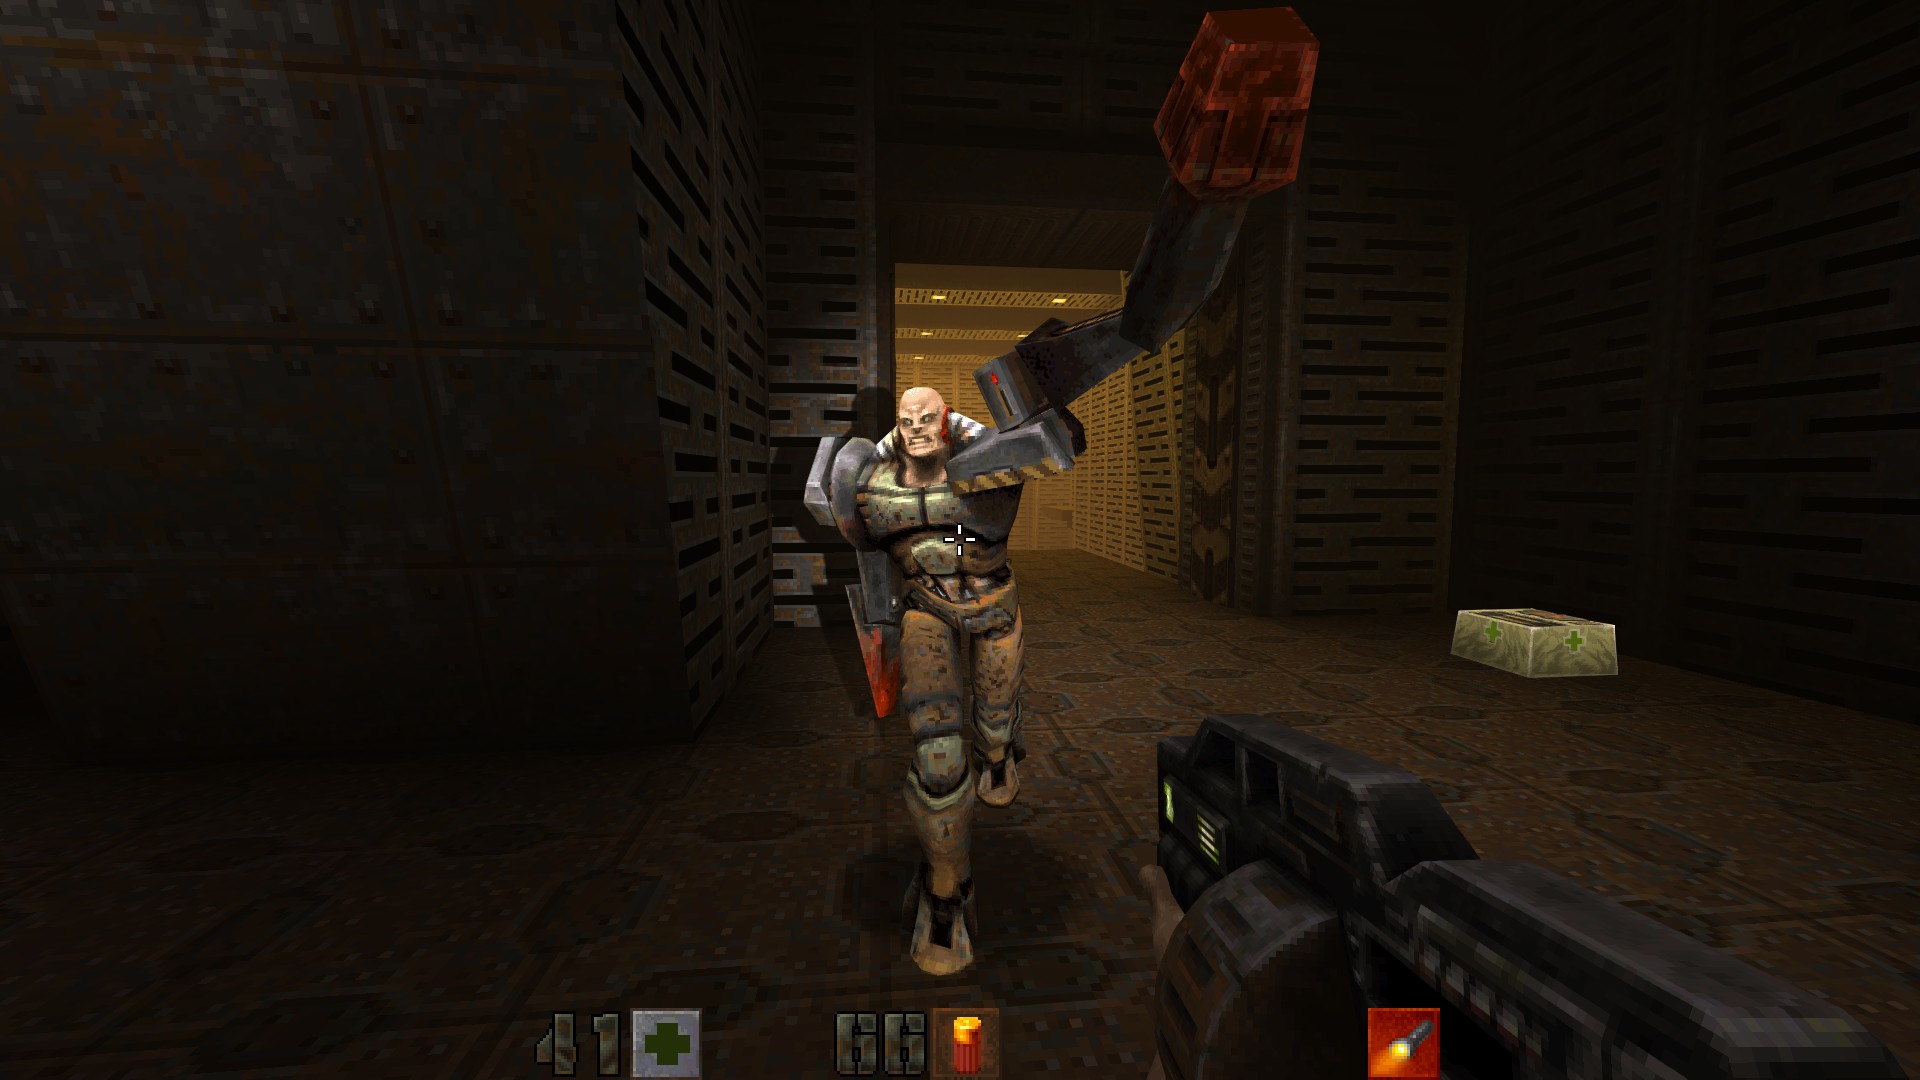 Quake II - How to Enable New Flashlight Guide - How to add the new Flashlight to your inventory. - 58B5112